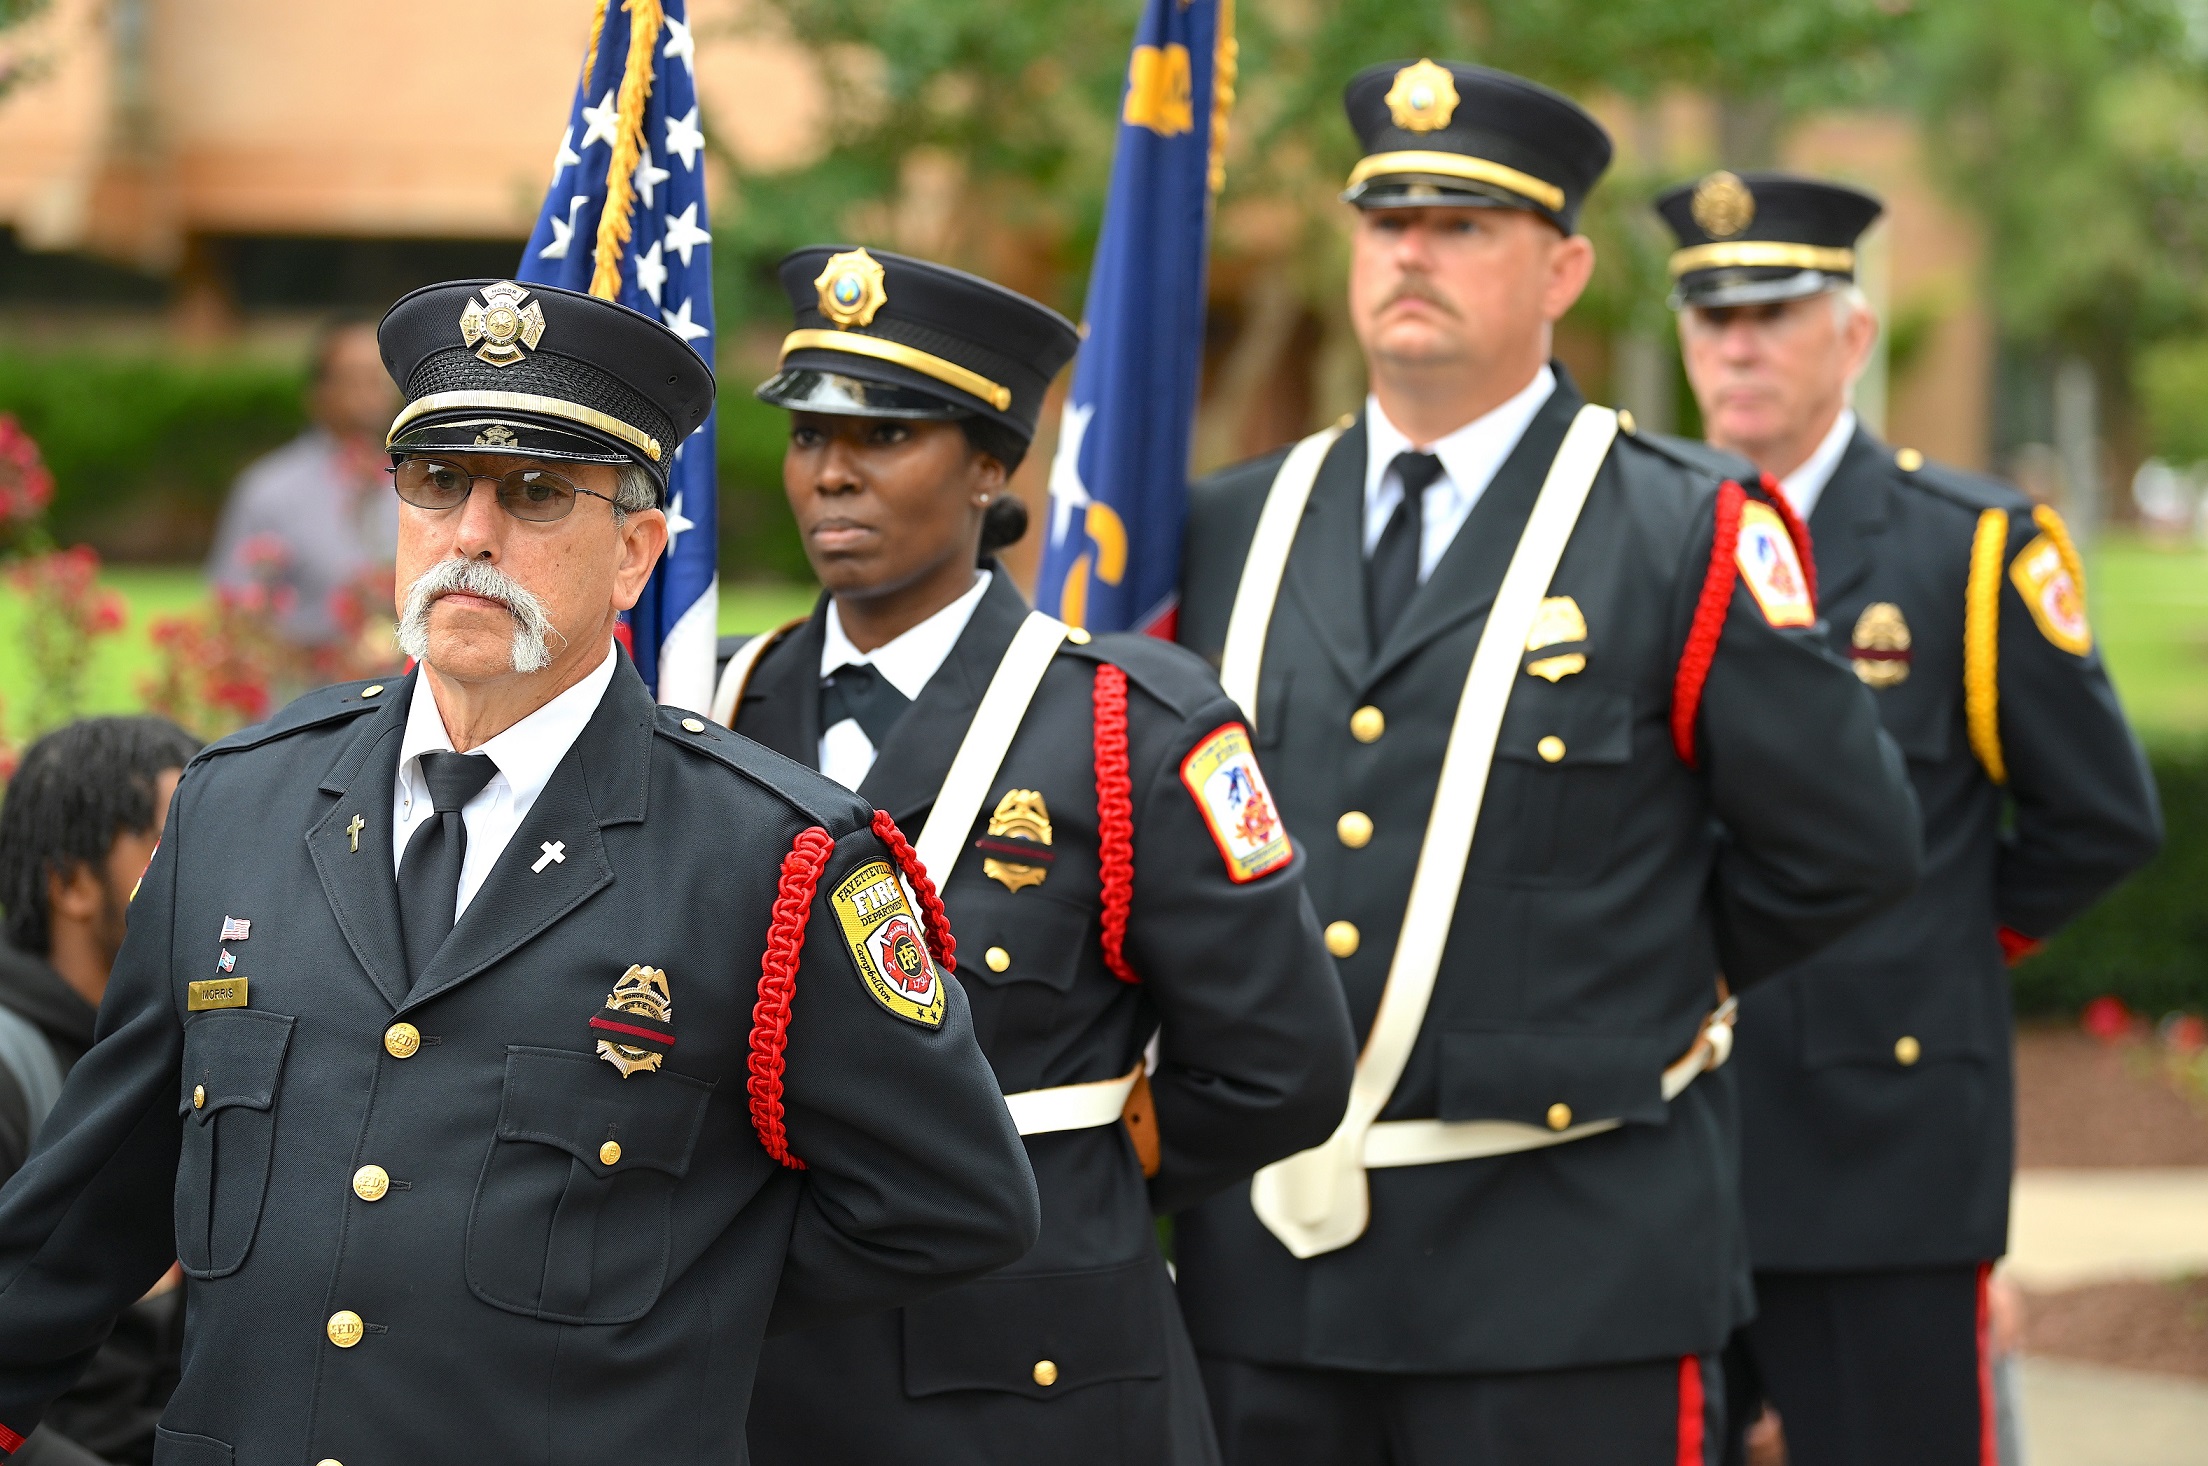 Members of the Cumberland County Emergency Services Honor Guard walk in a line to post the colors.